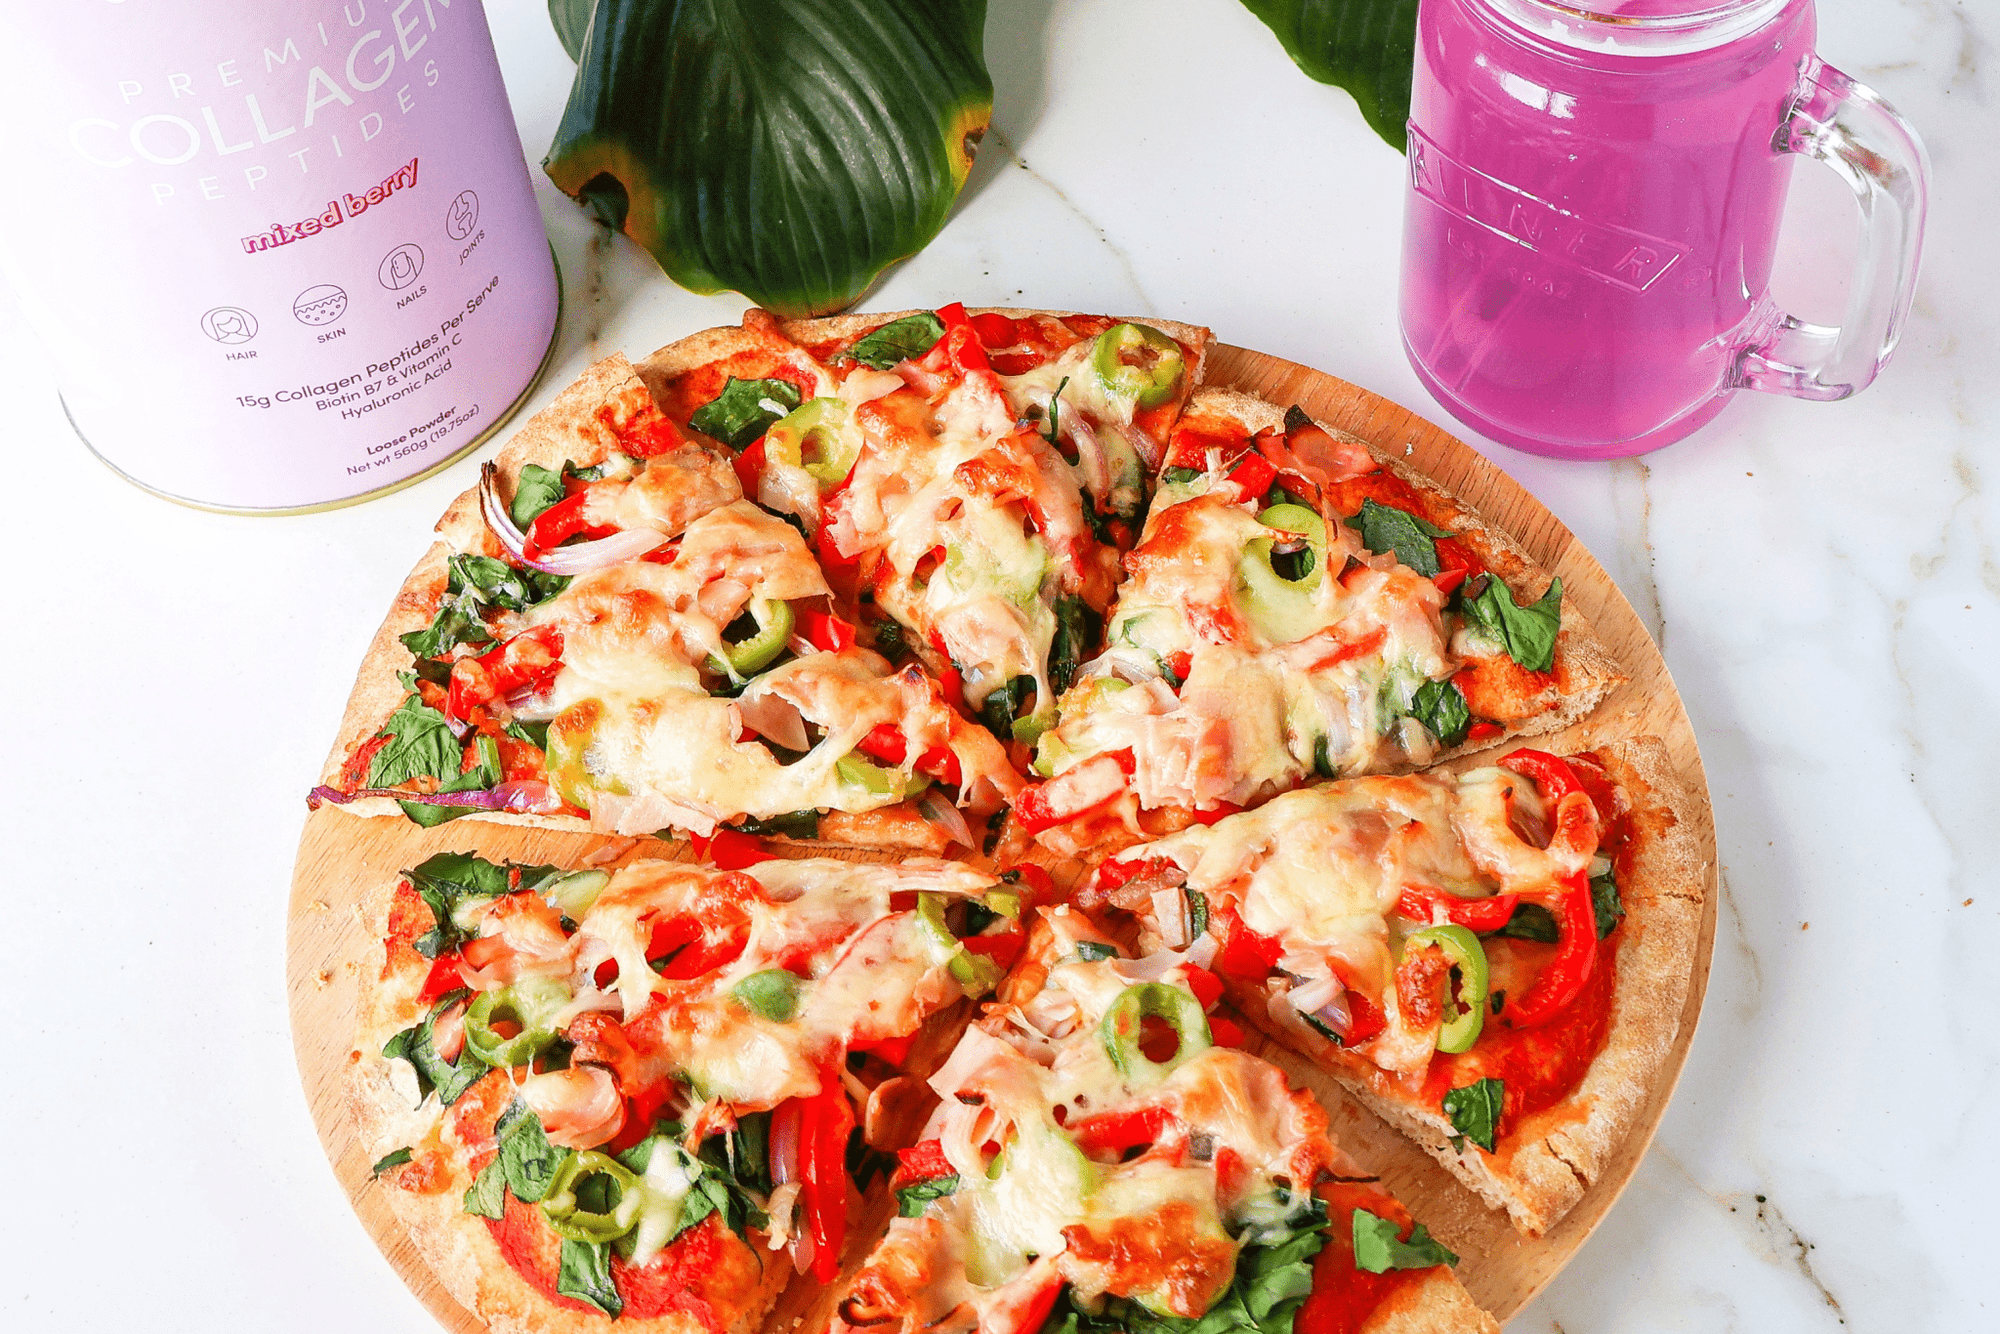 High Protein Pizza - The Collagen Co.